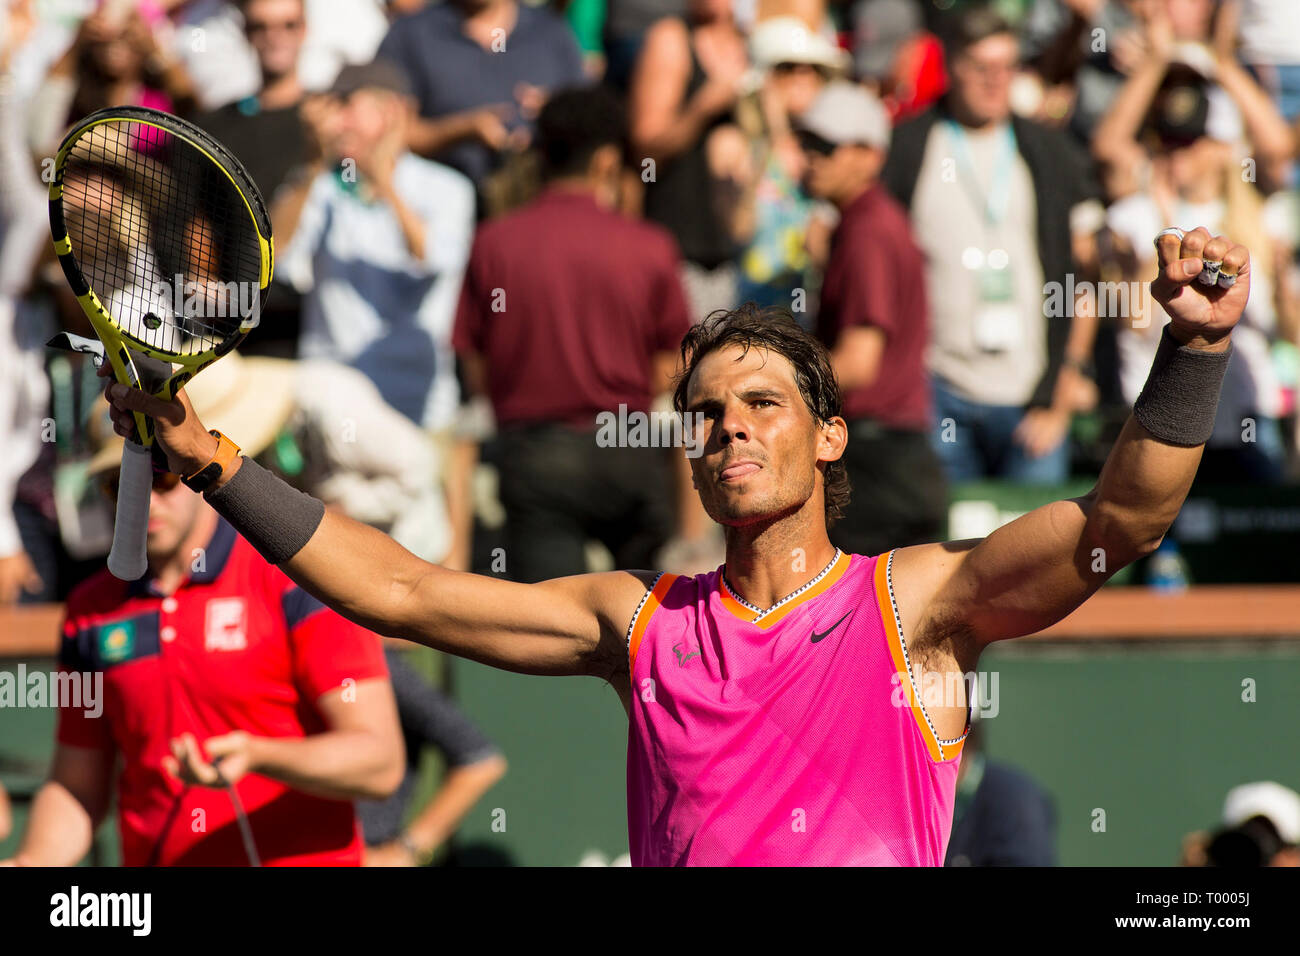 Rafael Nadal (ESP) waves to the crowd after he defeated Karen Khachanov (RUS) 7-6, 7-6 at the BNP Paribas Open at the Indian Wells Tennis Garden in Indian Wells, California